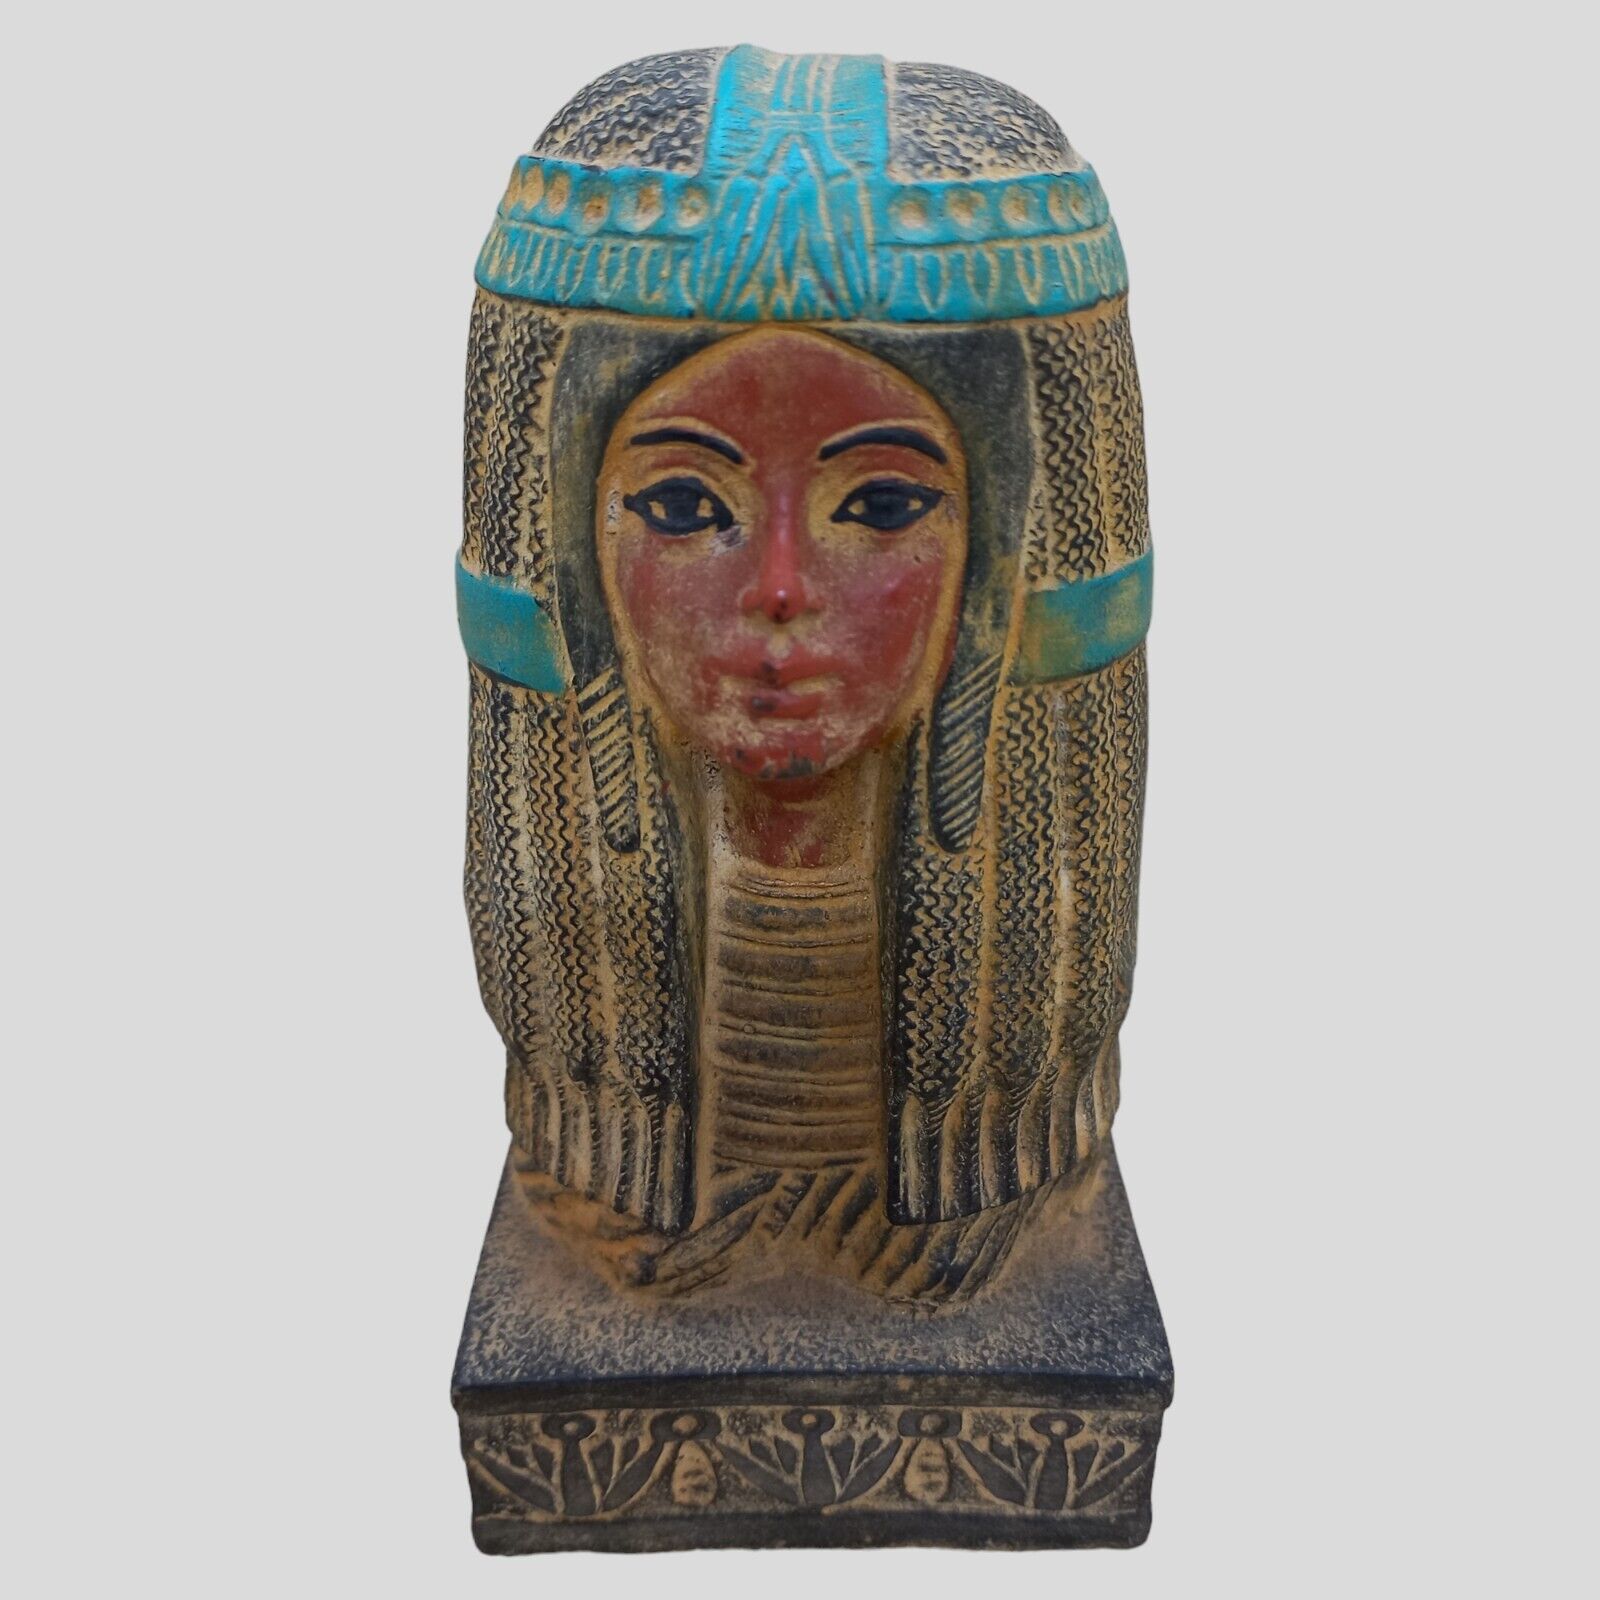 RARE QUEEN HATSHEPSUT STATUE FROM ANCIENT PHARAONIC EGYPT HISTORY ANTIQUITIES